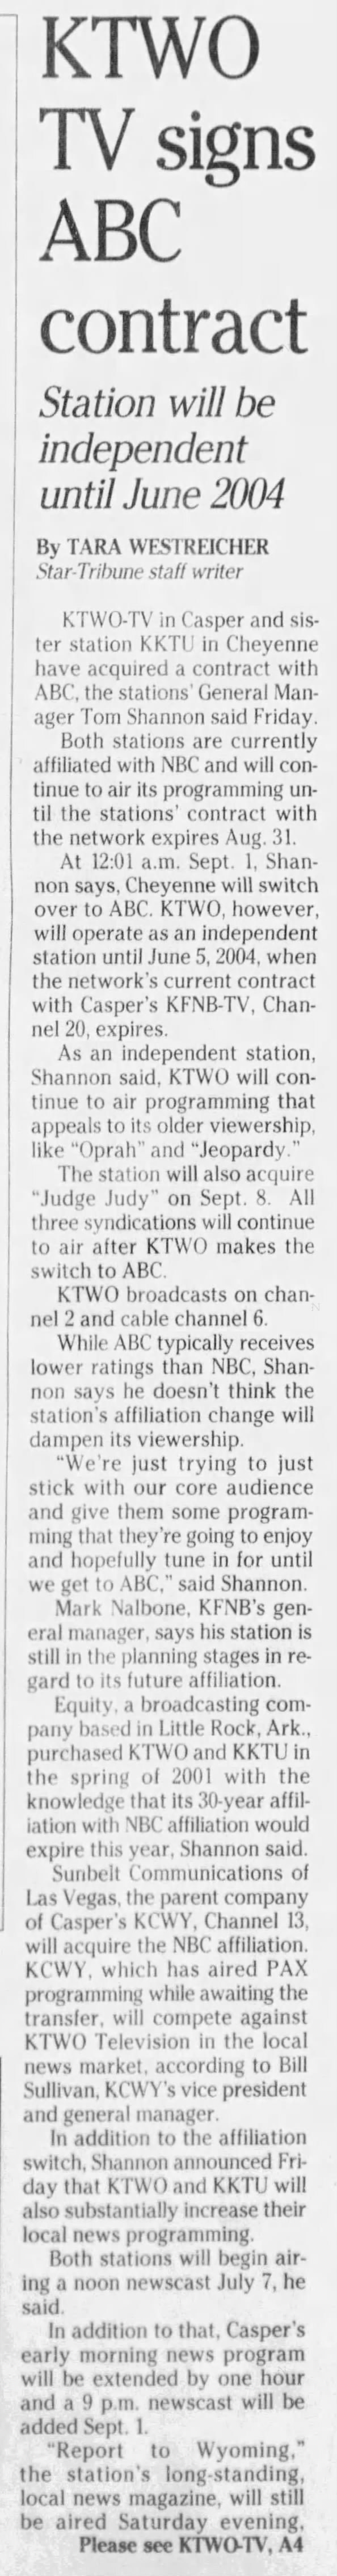 KTWO-TV signs ABC contract: Station will be independent until June 2004